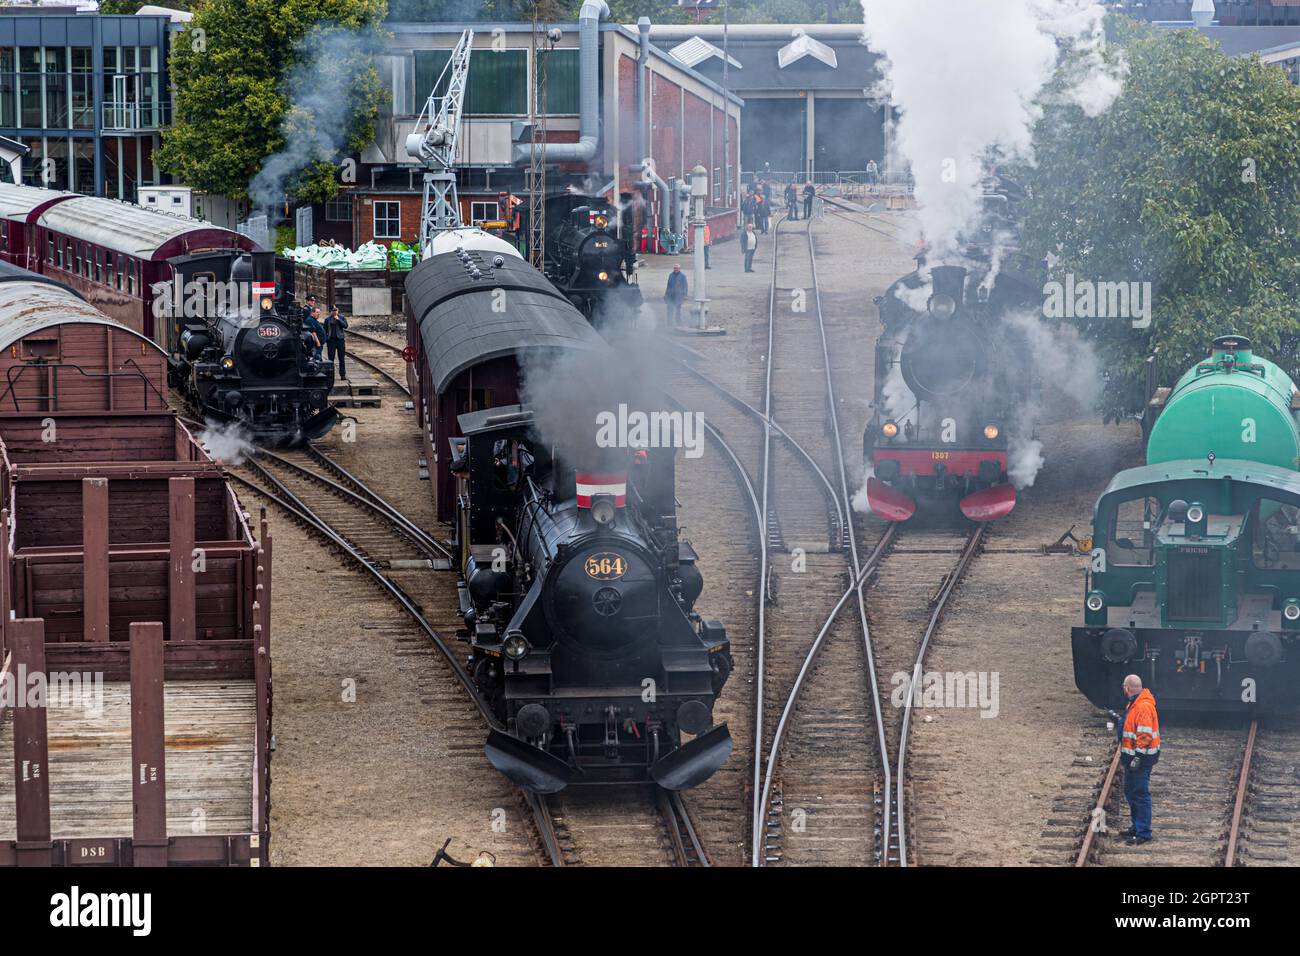 Steam locomotive meeting at the Odense Railway Museum (Jernbanemuseum) in Odense, Denmark. Due to Corona's delay of one year, the event (Dampdage 2021) commemorated the end of Danish steam locomotive operation half a century ago in 1970. Stock Photo